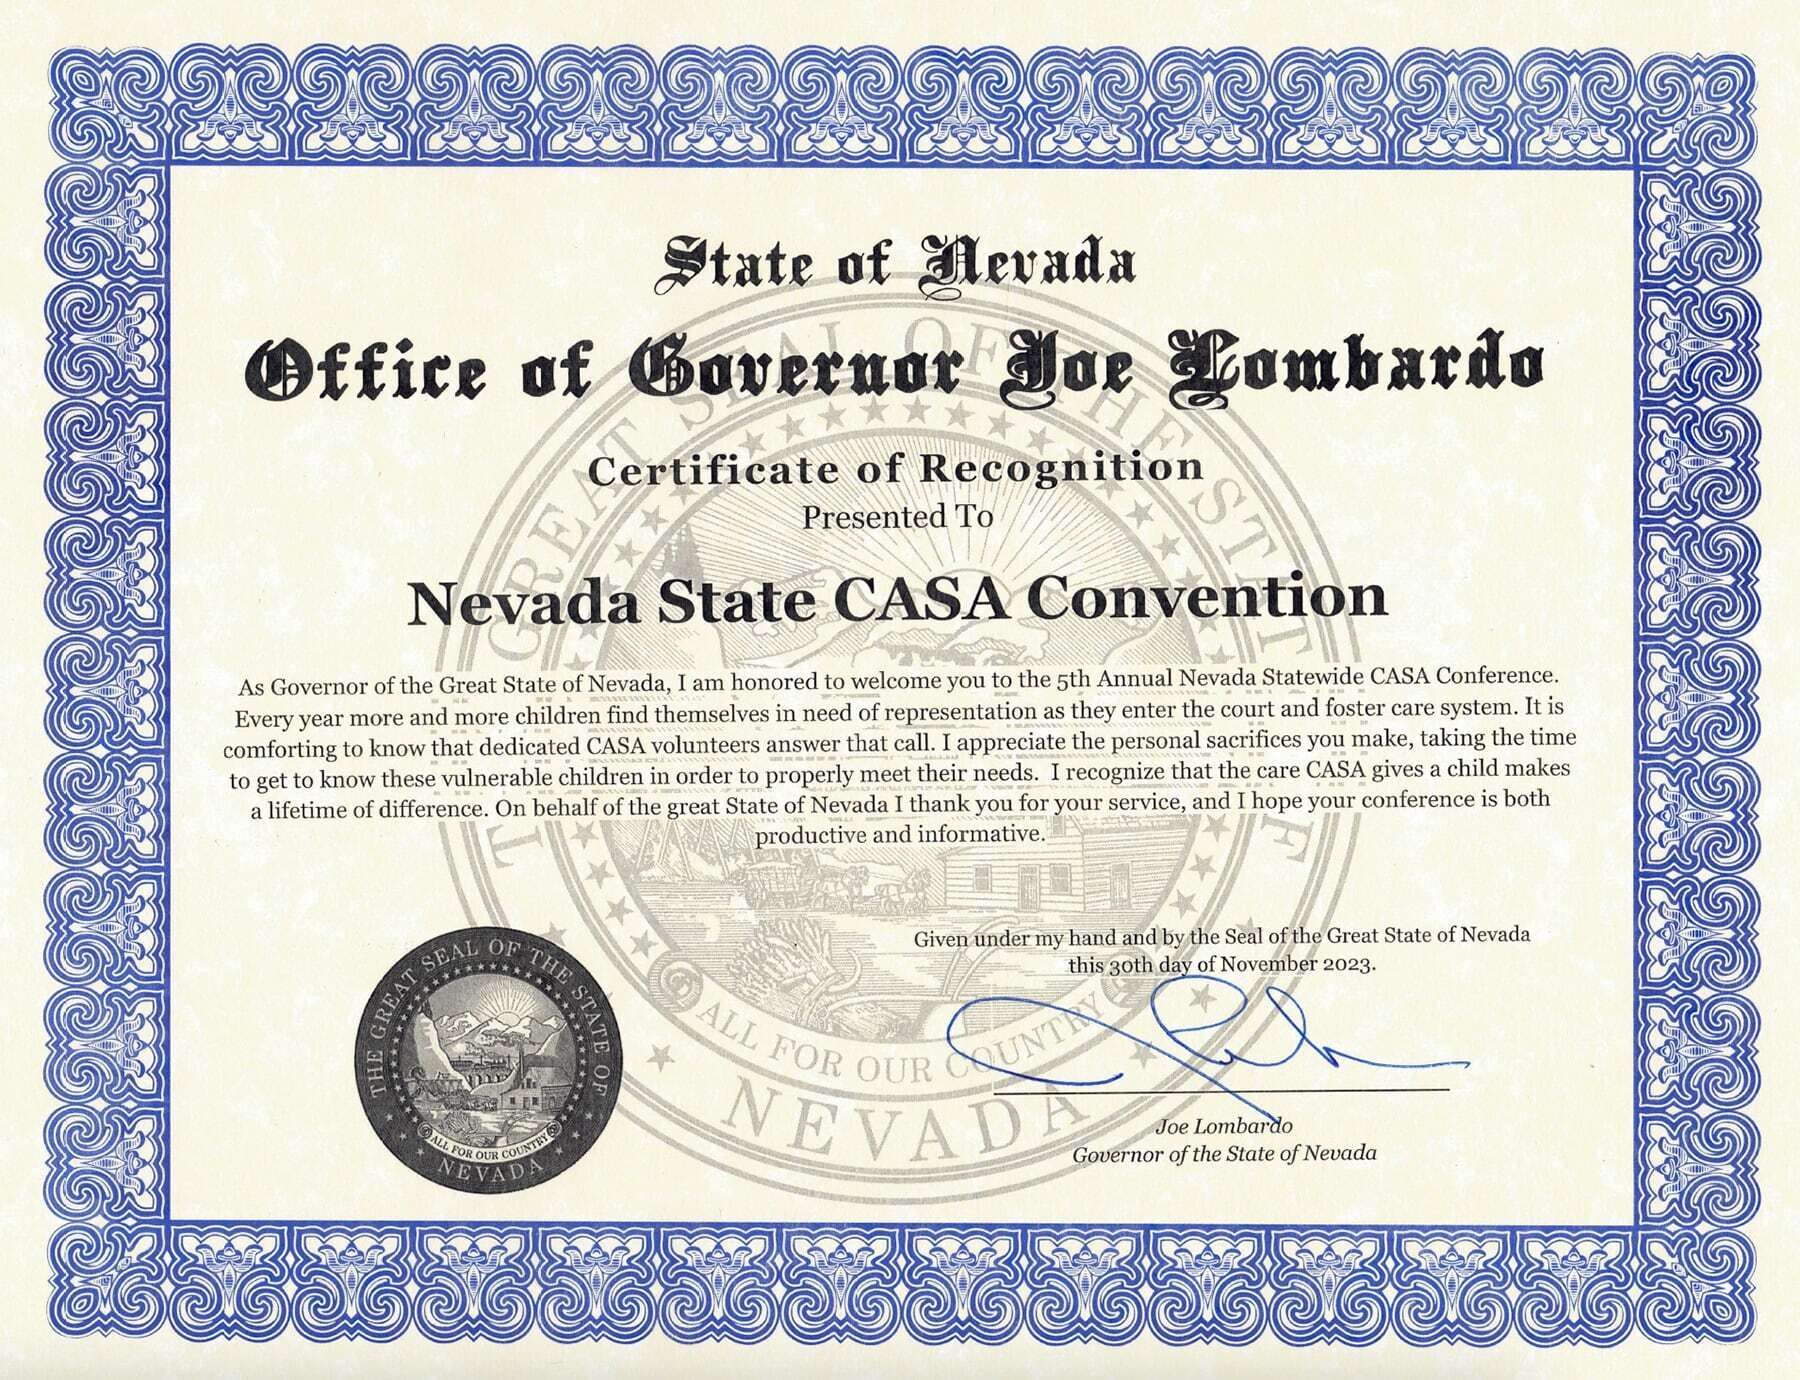 Certificate of Recognition from State of Nevada